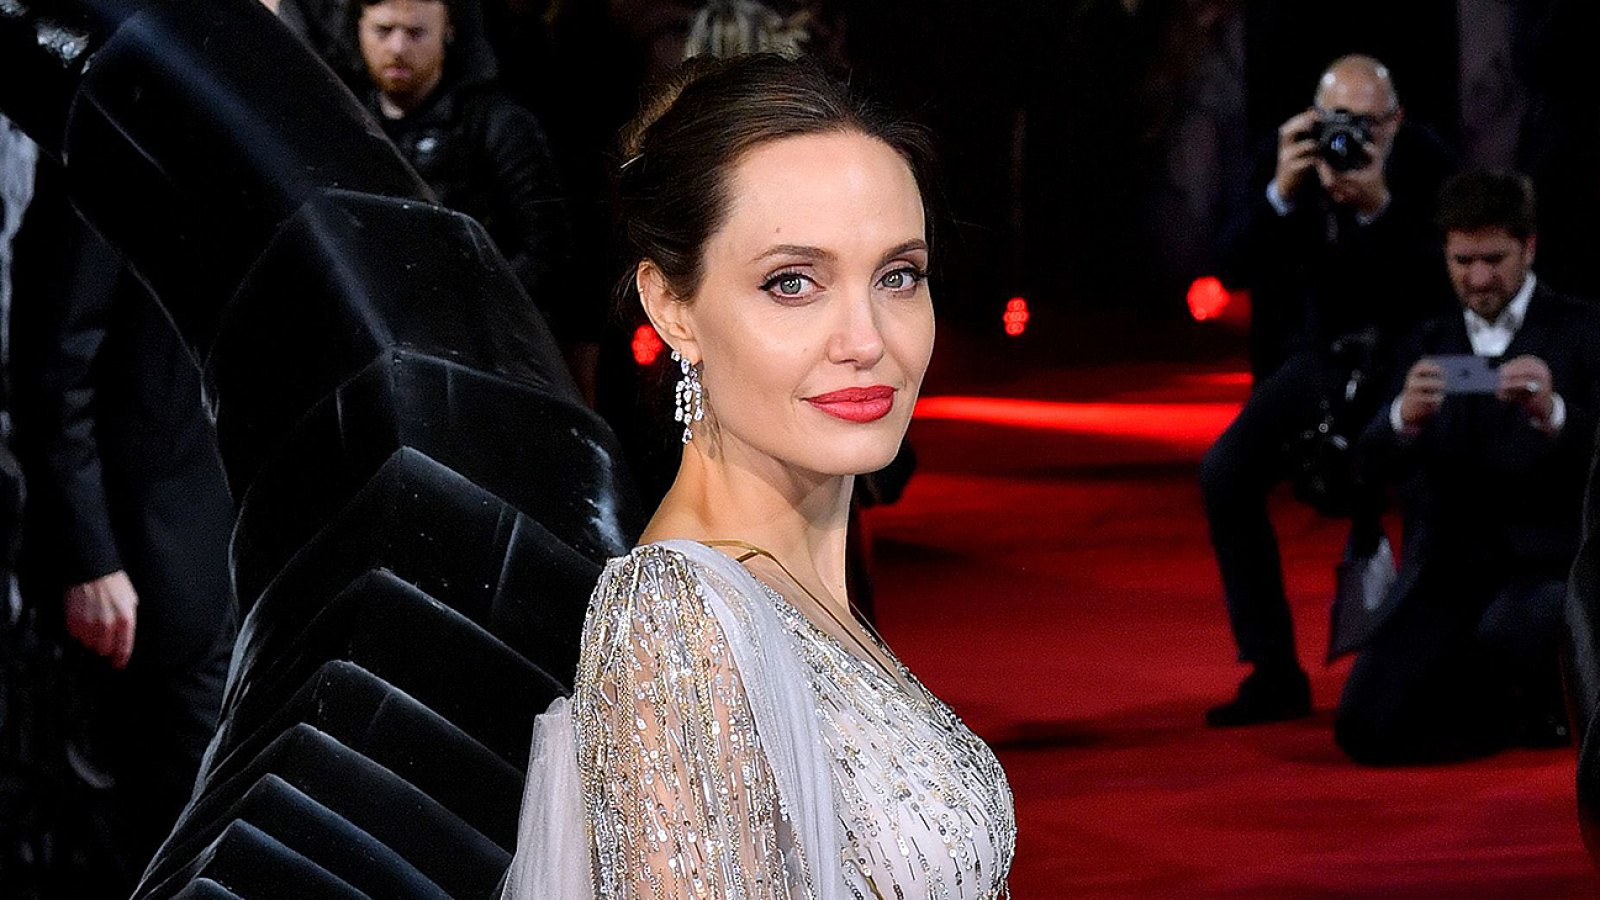 Angelina Jolie Face 2020 Wallpapers